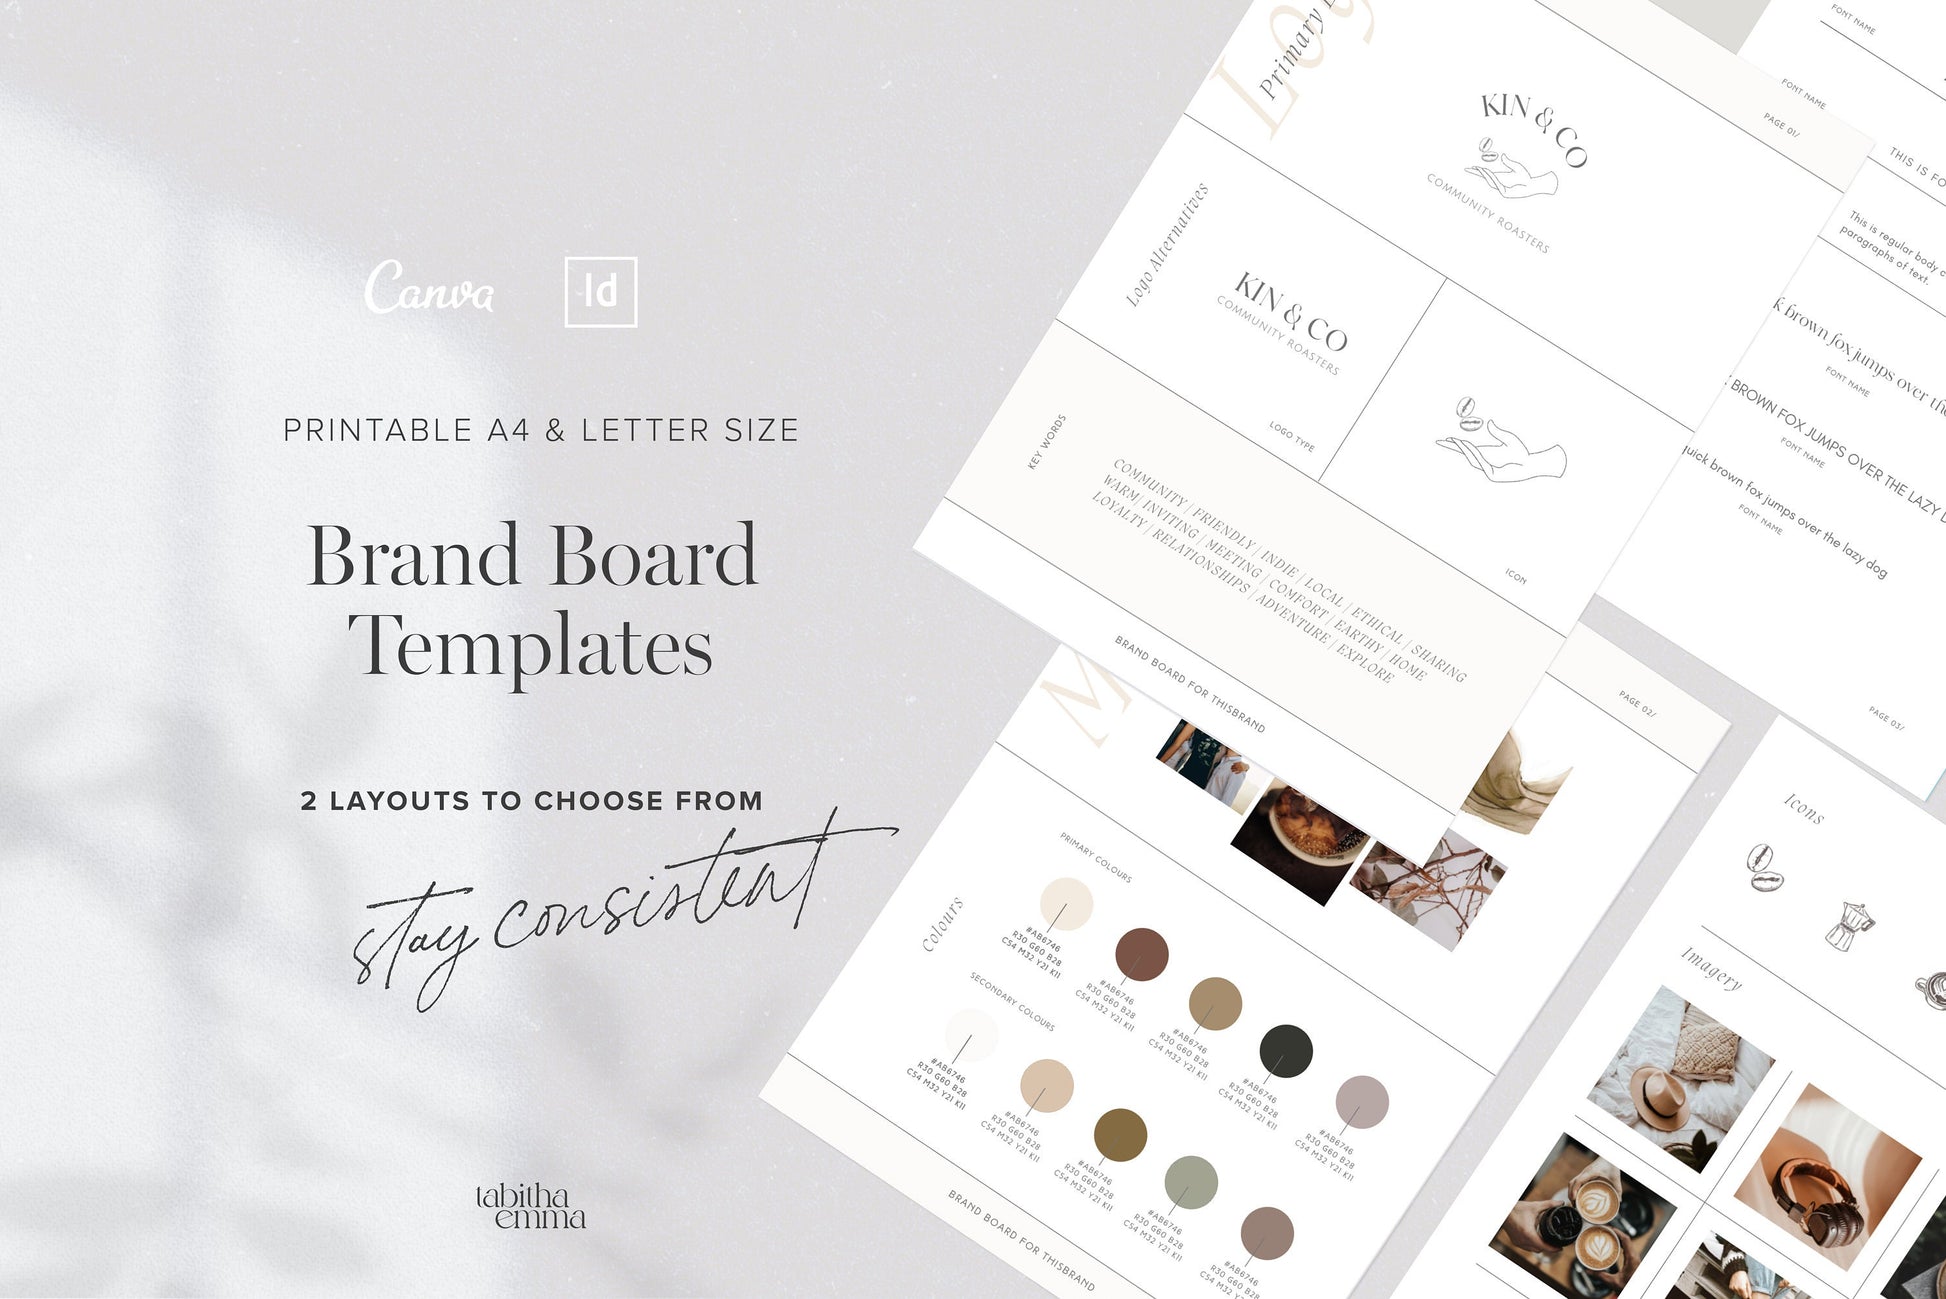 Brand Board Template for Canva and Indesign